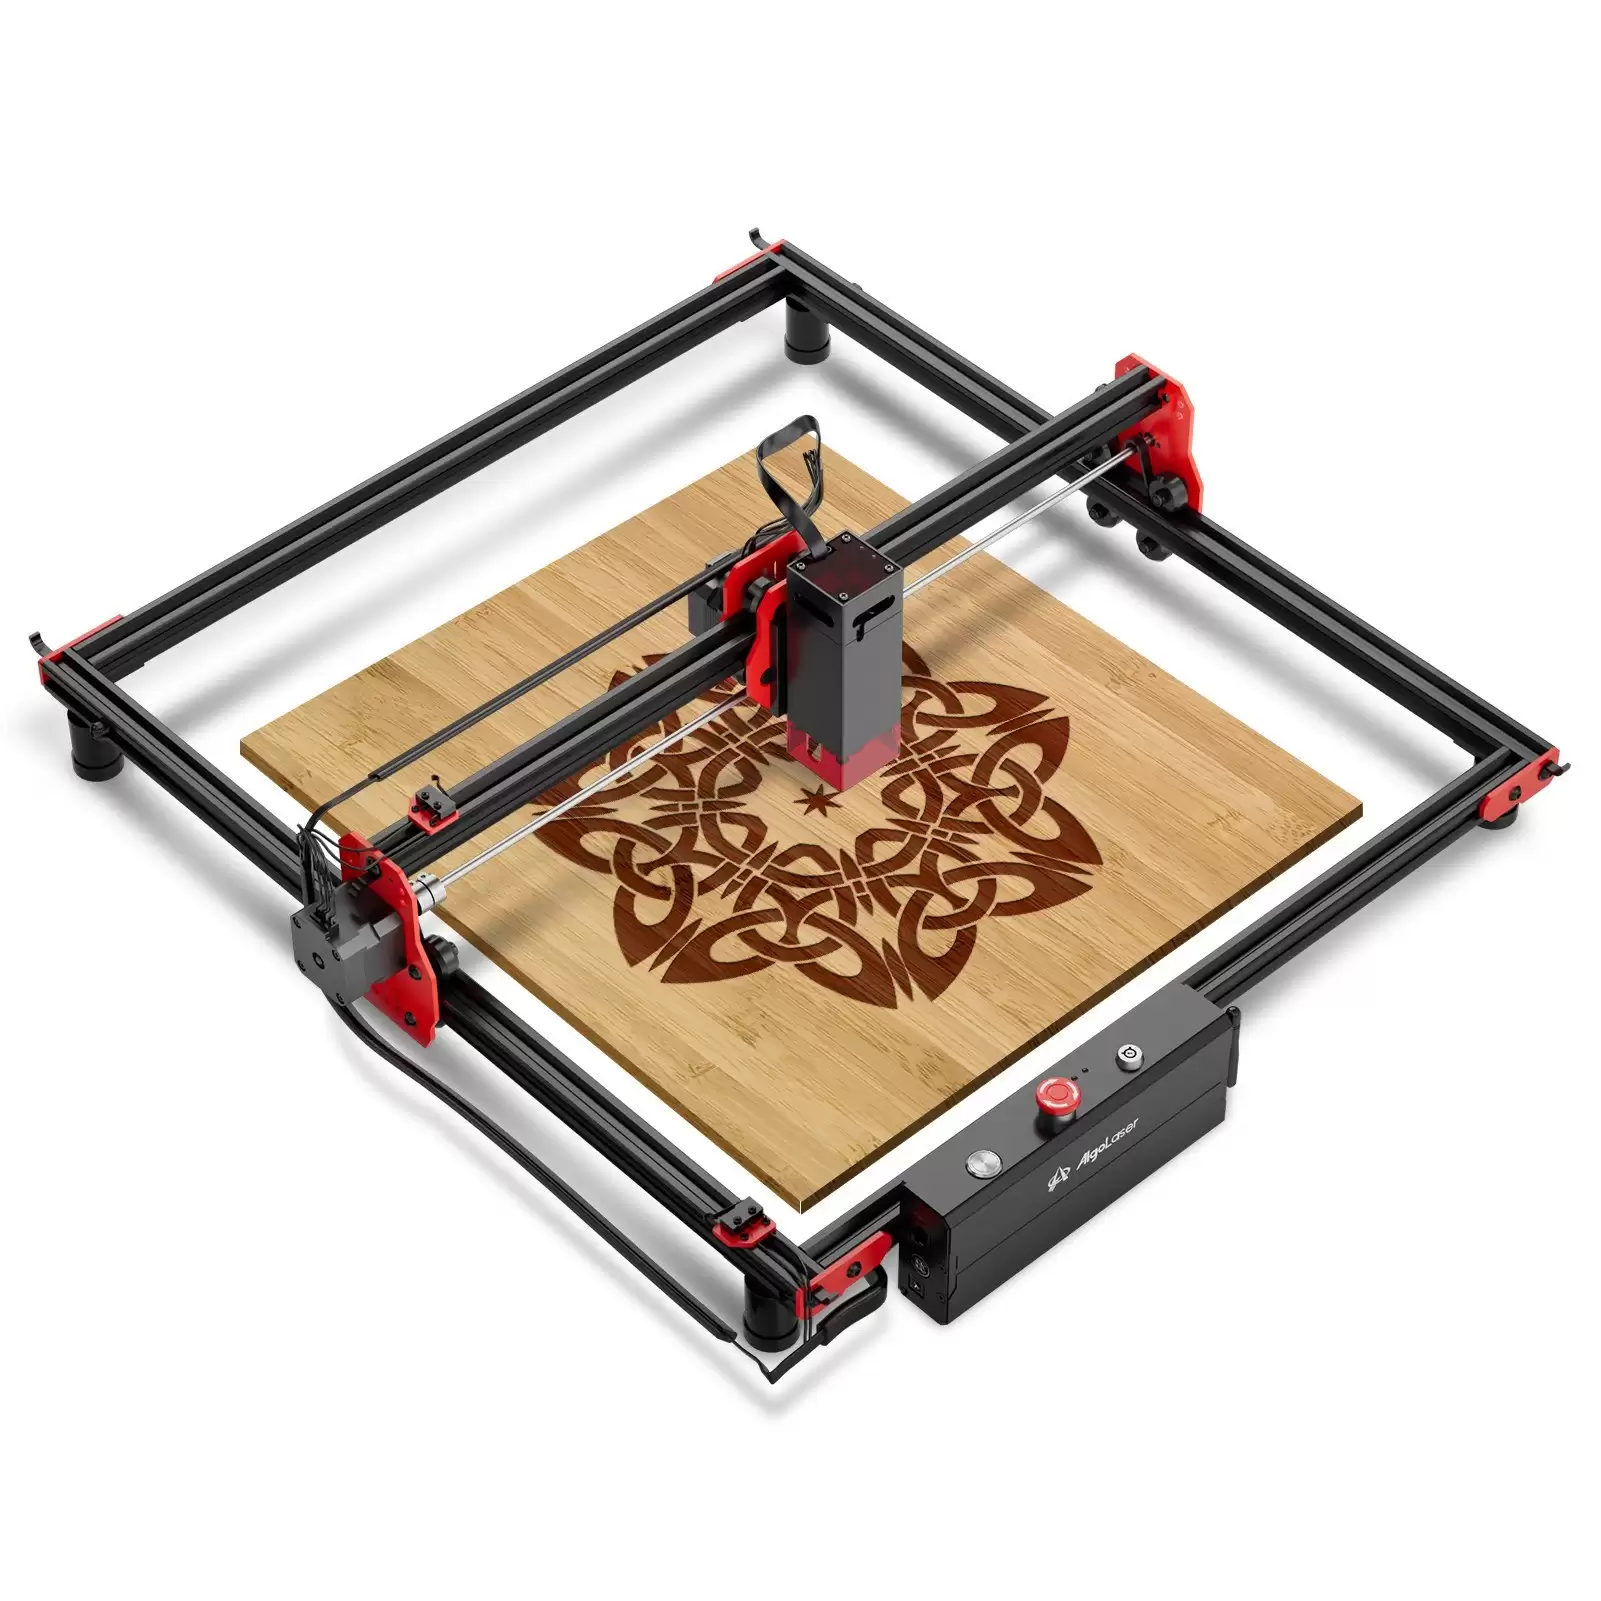 Pay Only $ 259 Algolaser Diy Kit 10w Laser Engraver ,Free Shipping With This Cafago Discount Voucher